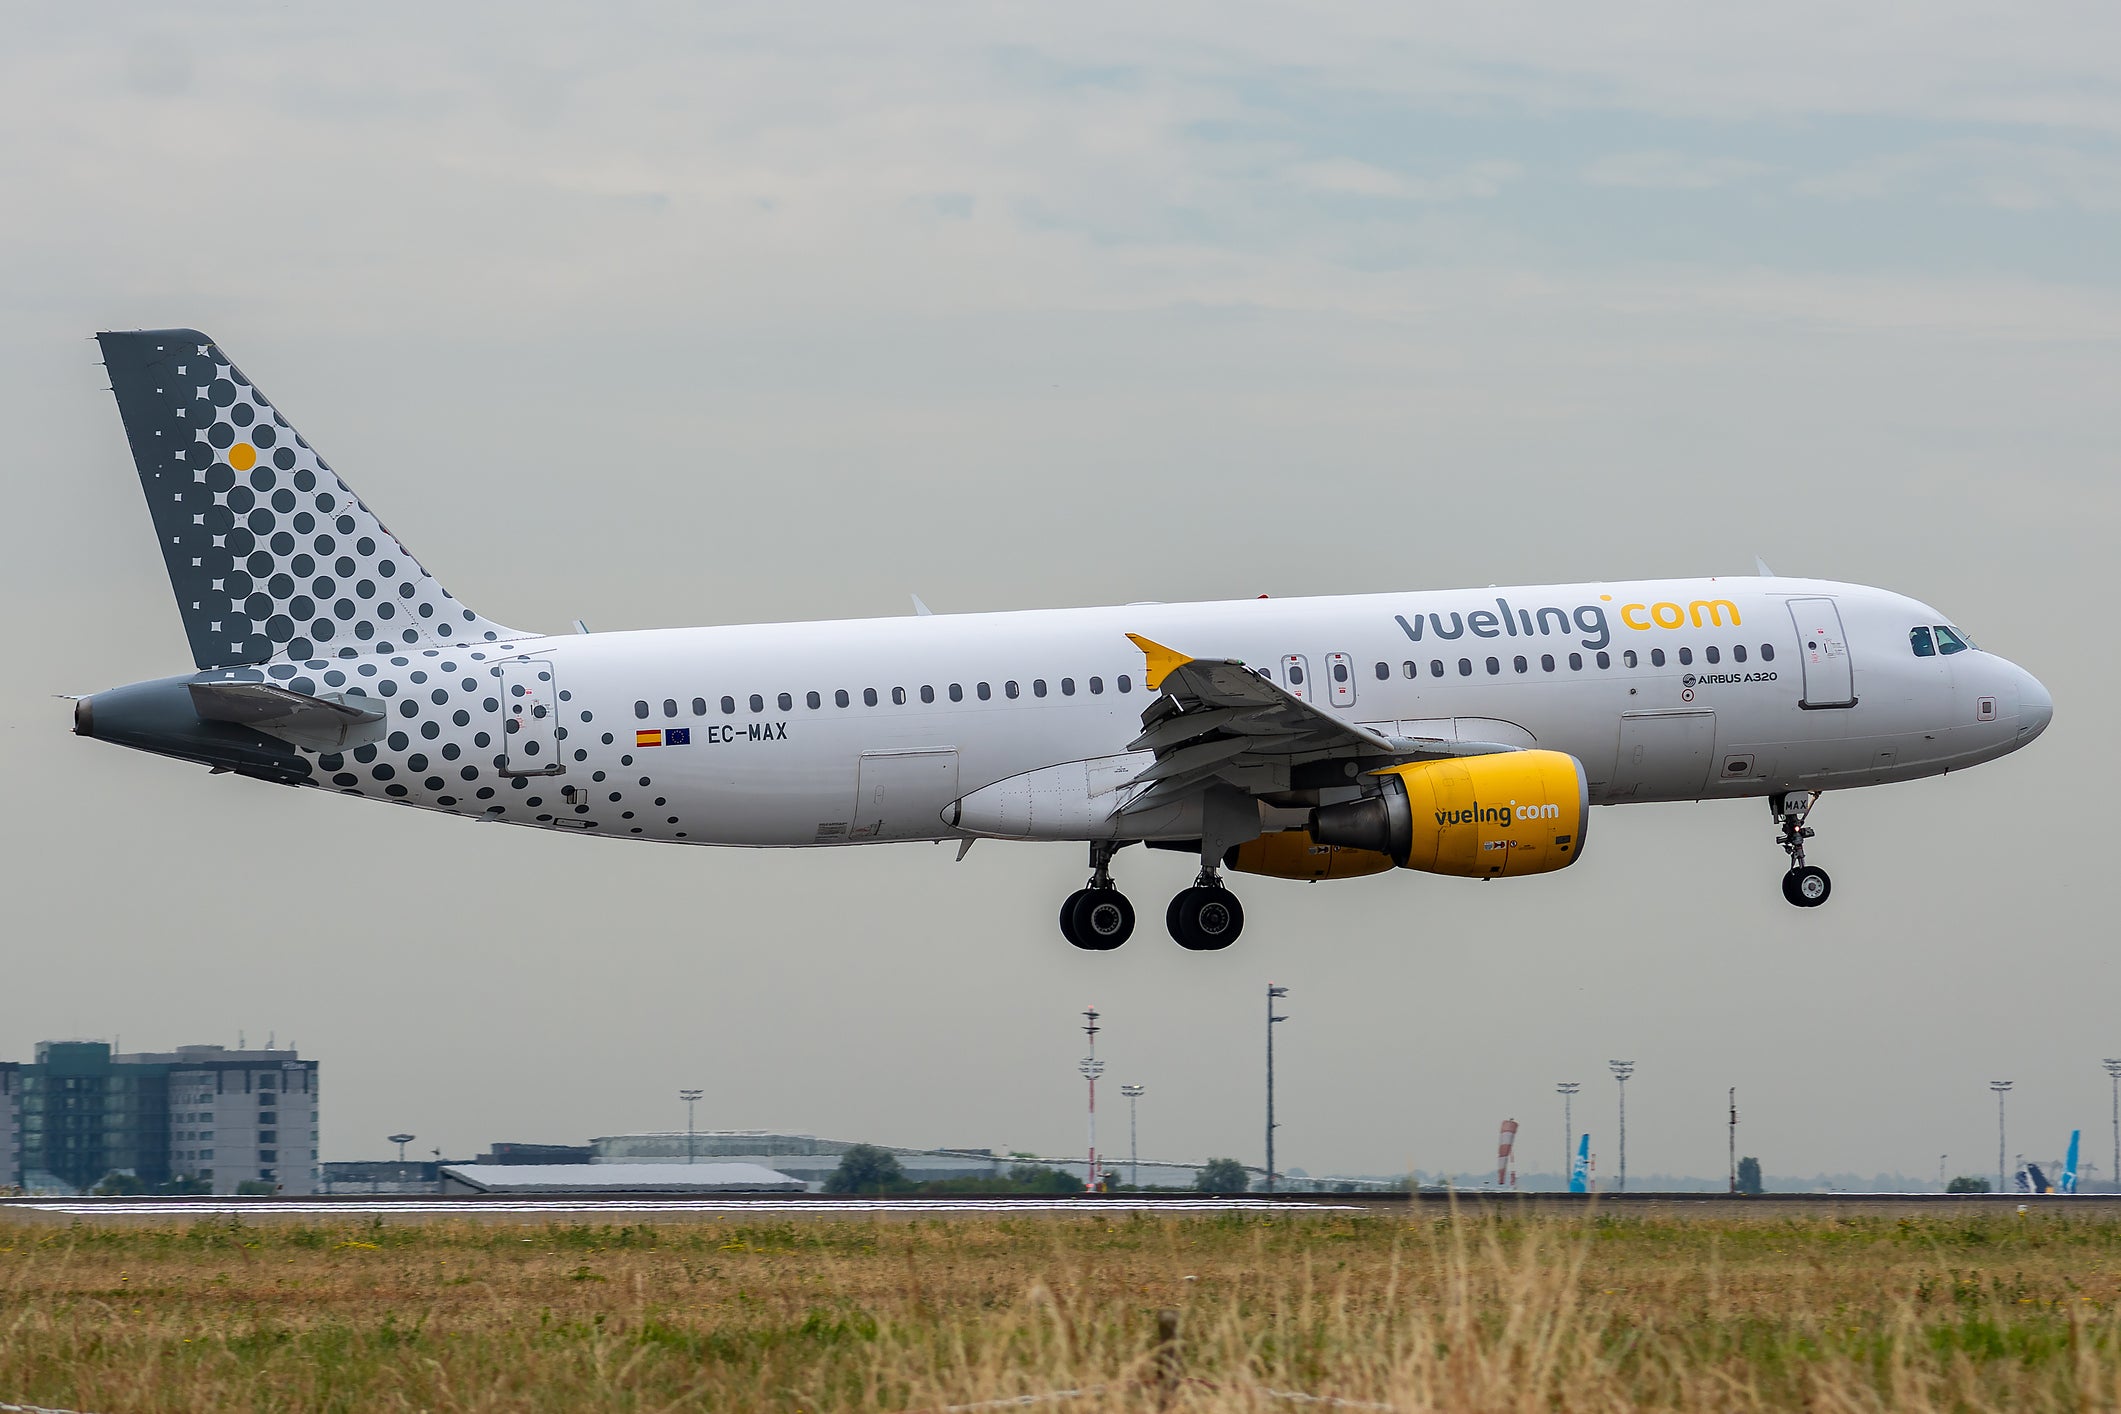 Vueling has been ranked the least punctual airline flying out of the UK